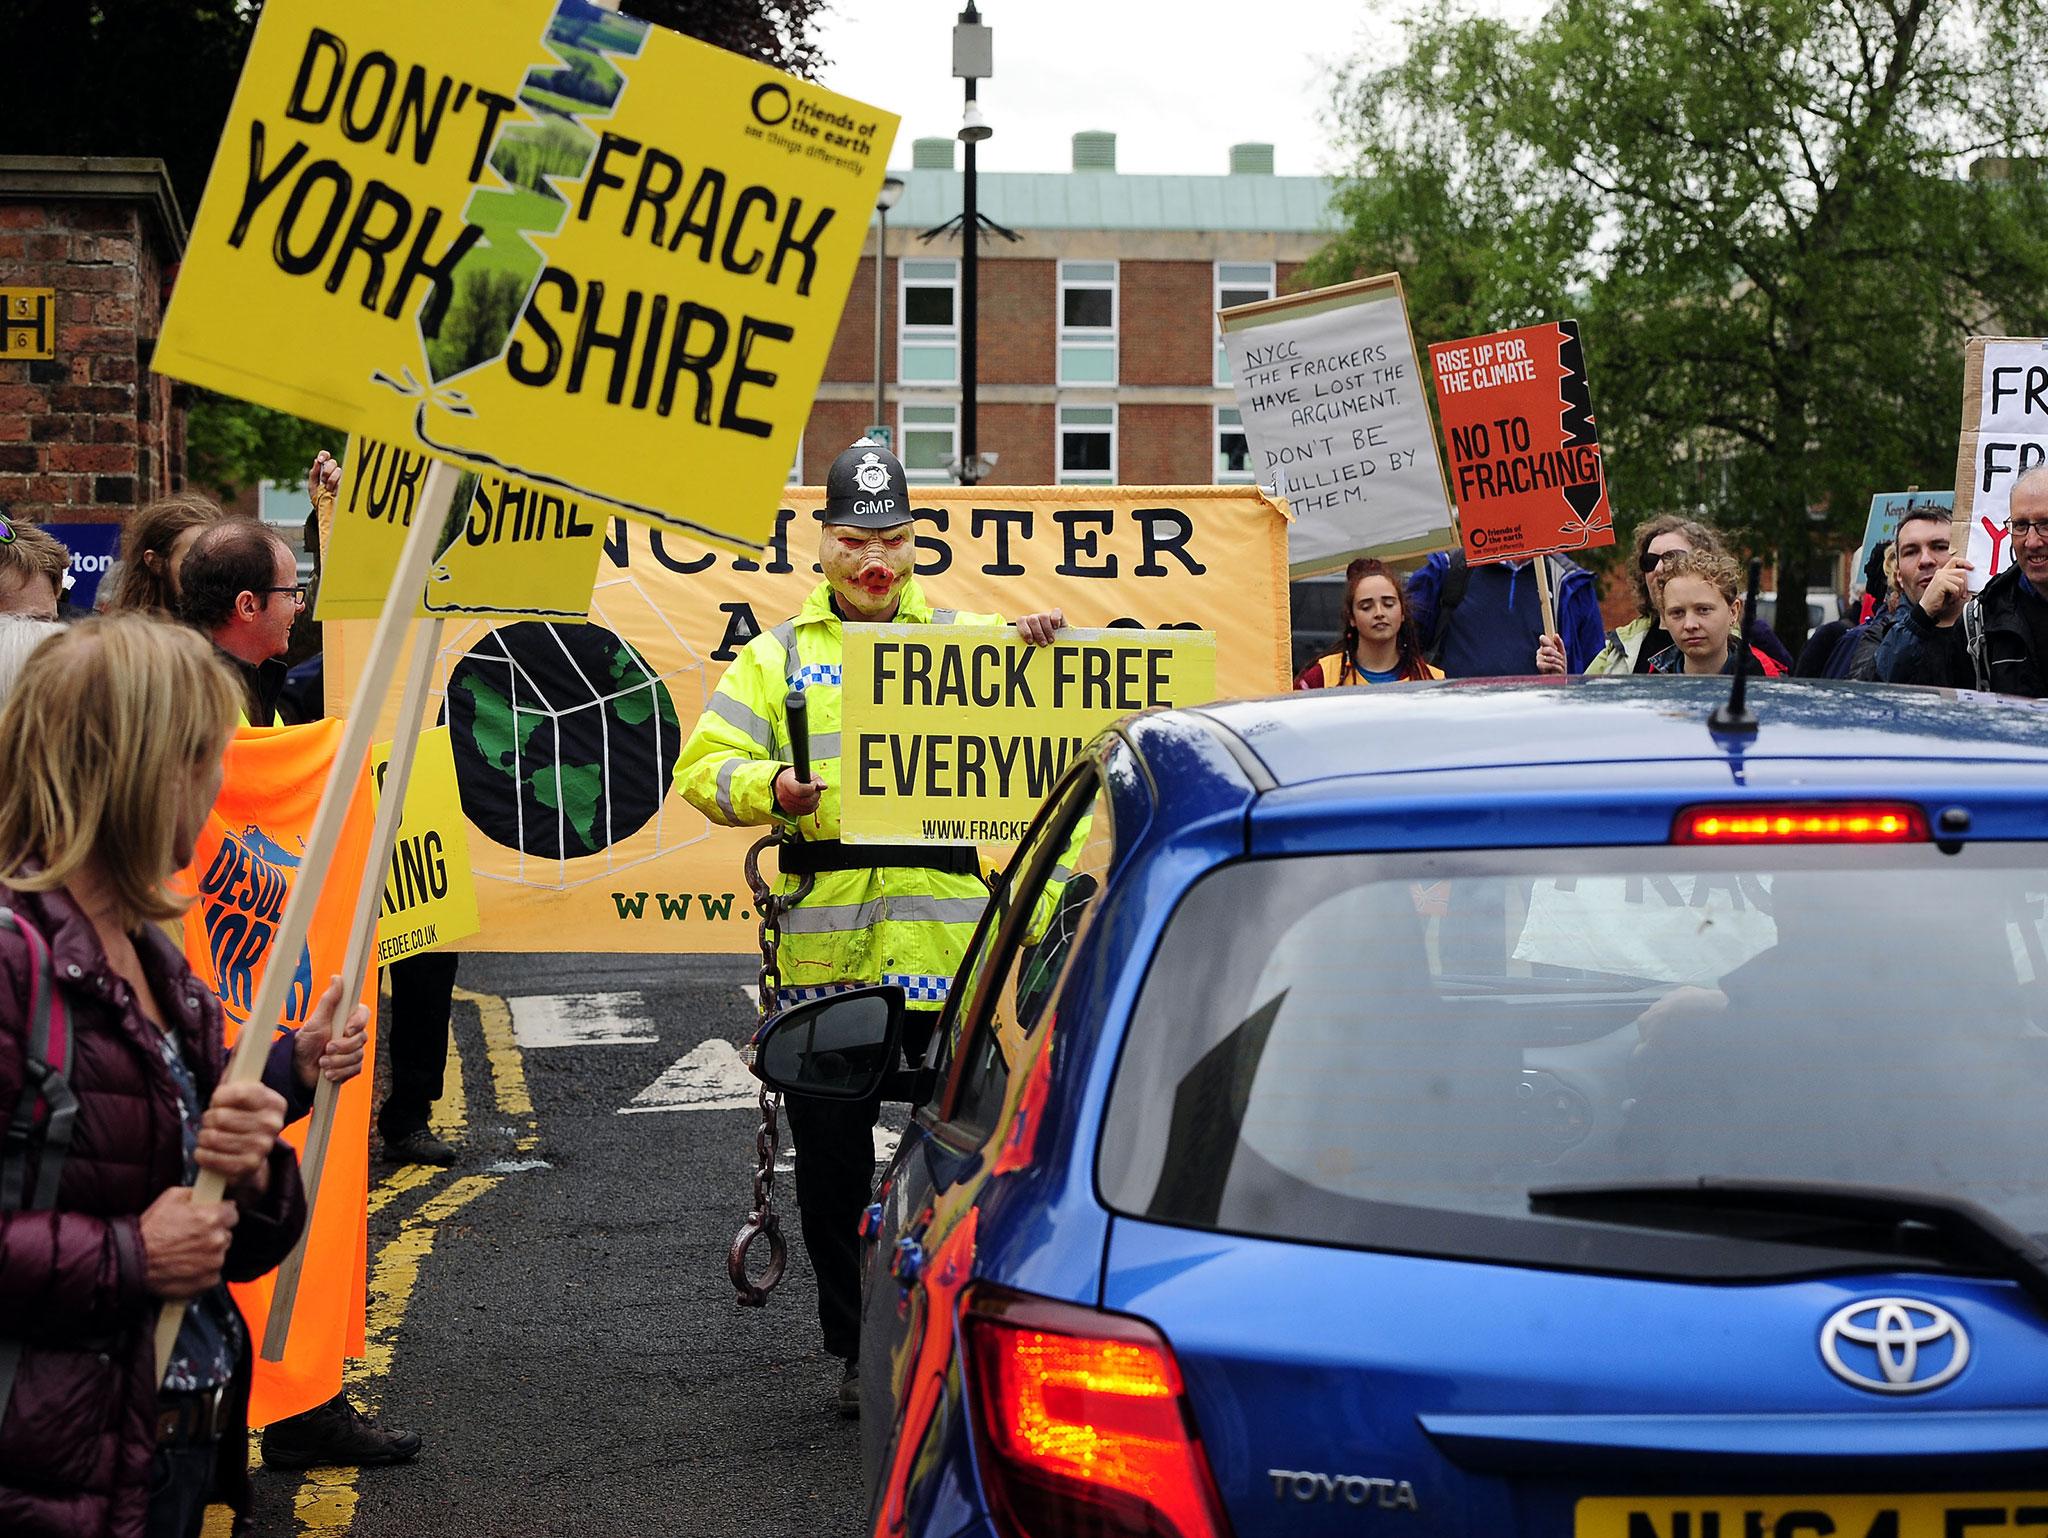 Anti-fracking protesters in Lancashire